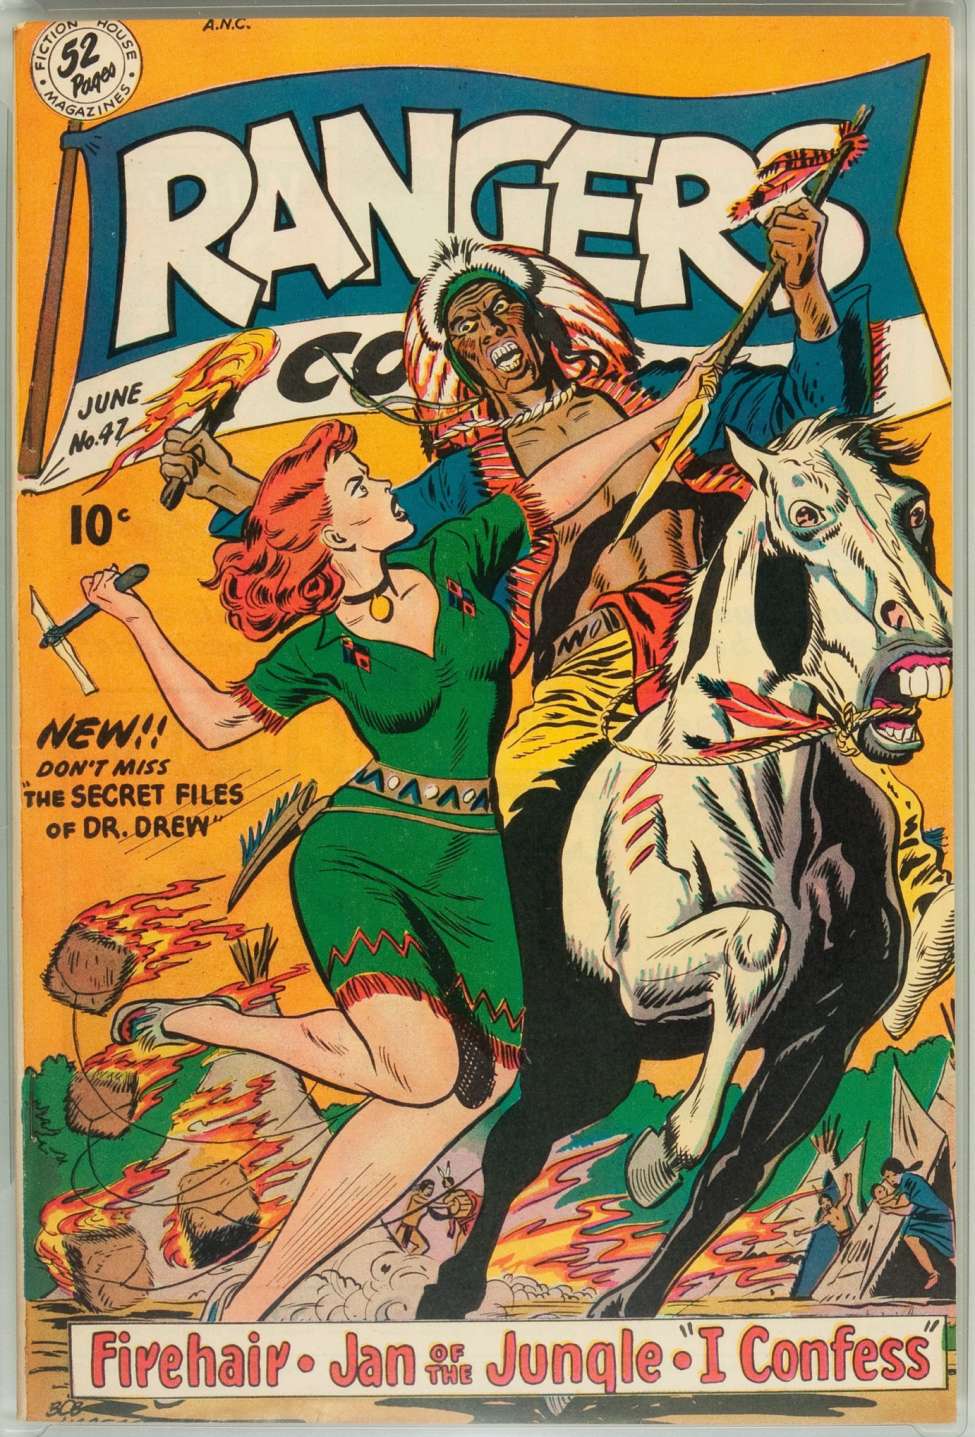 Book Cover For Rangers Comics 47 - Version 1